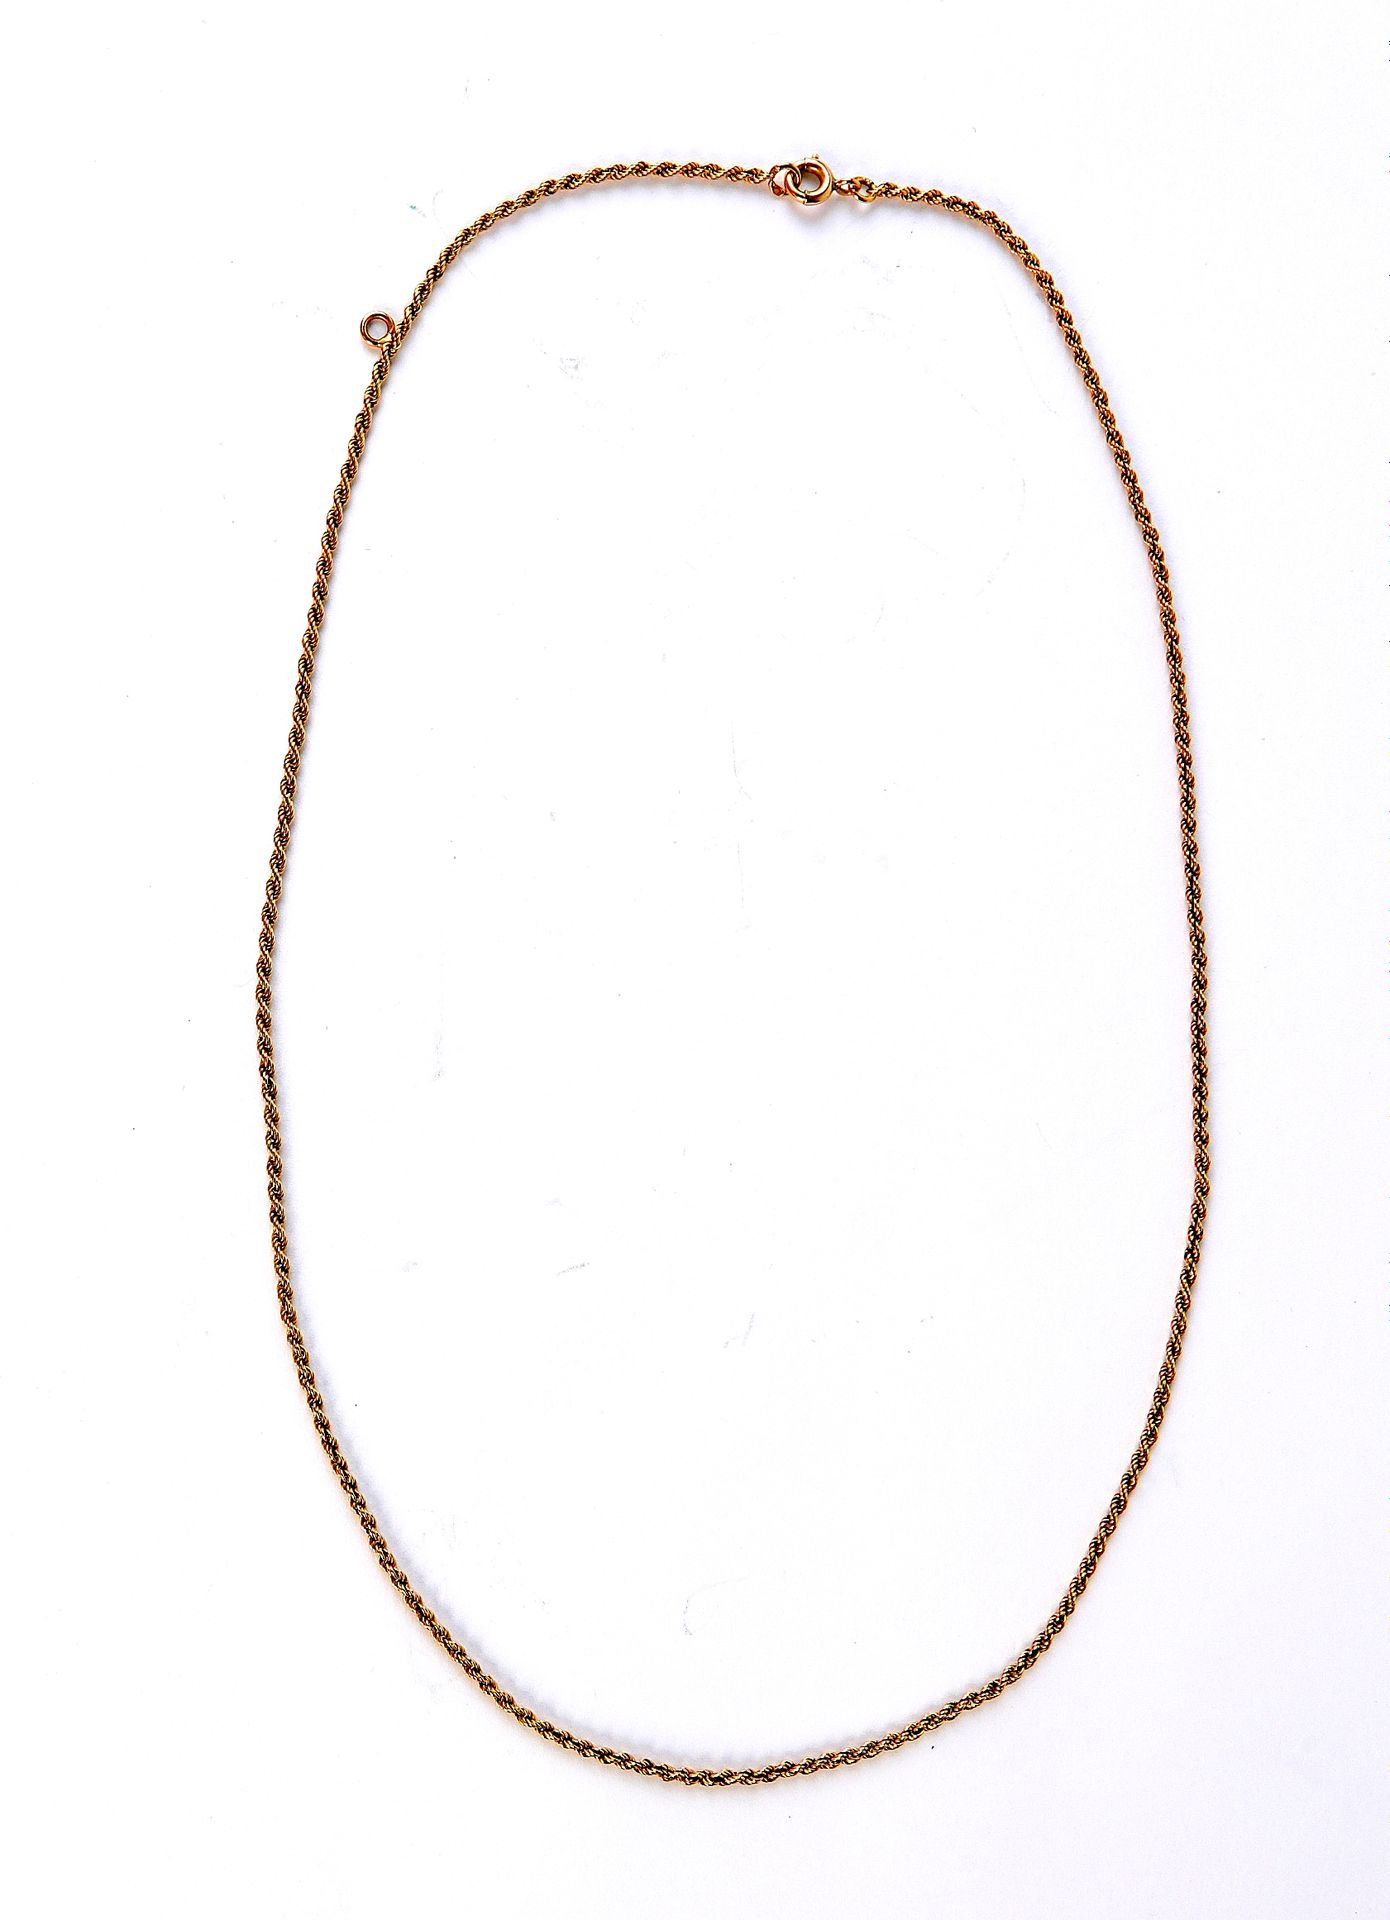 Null Necklace in 18 carat gold, twisted links. Weight : 4,5 g.